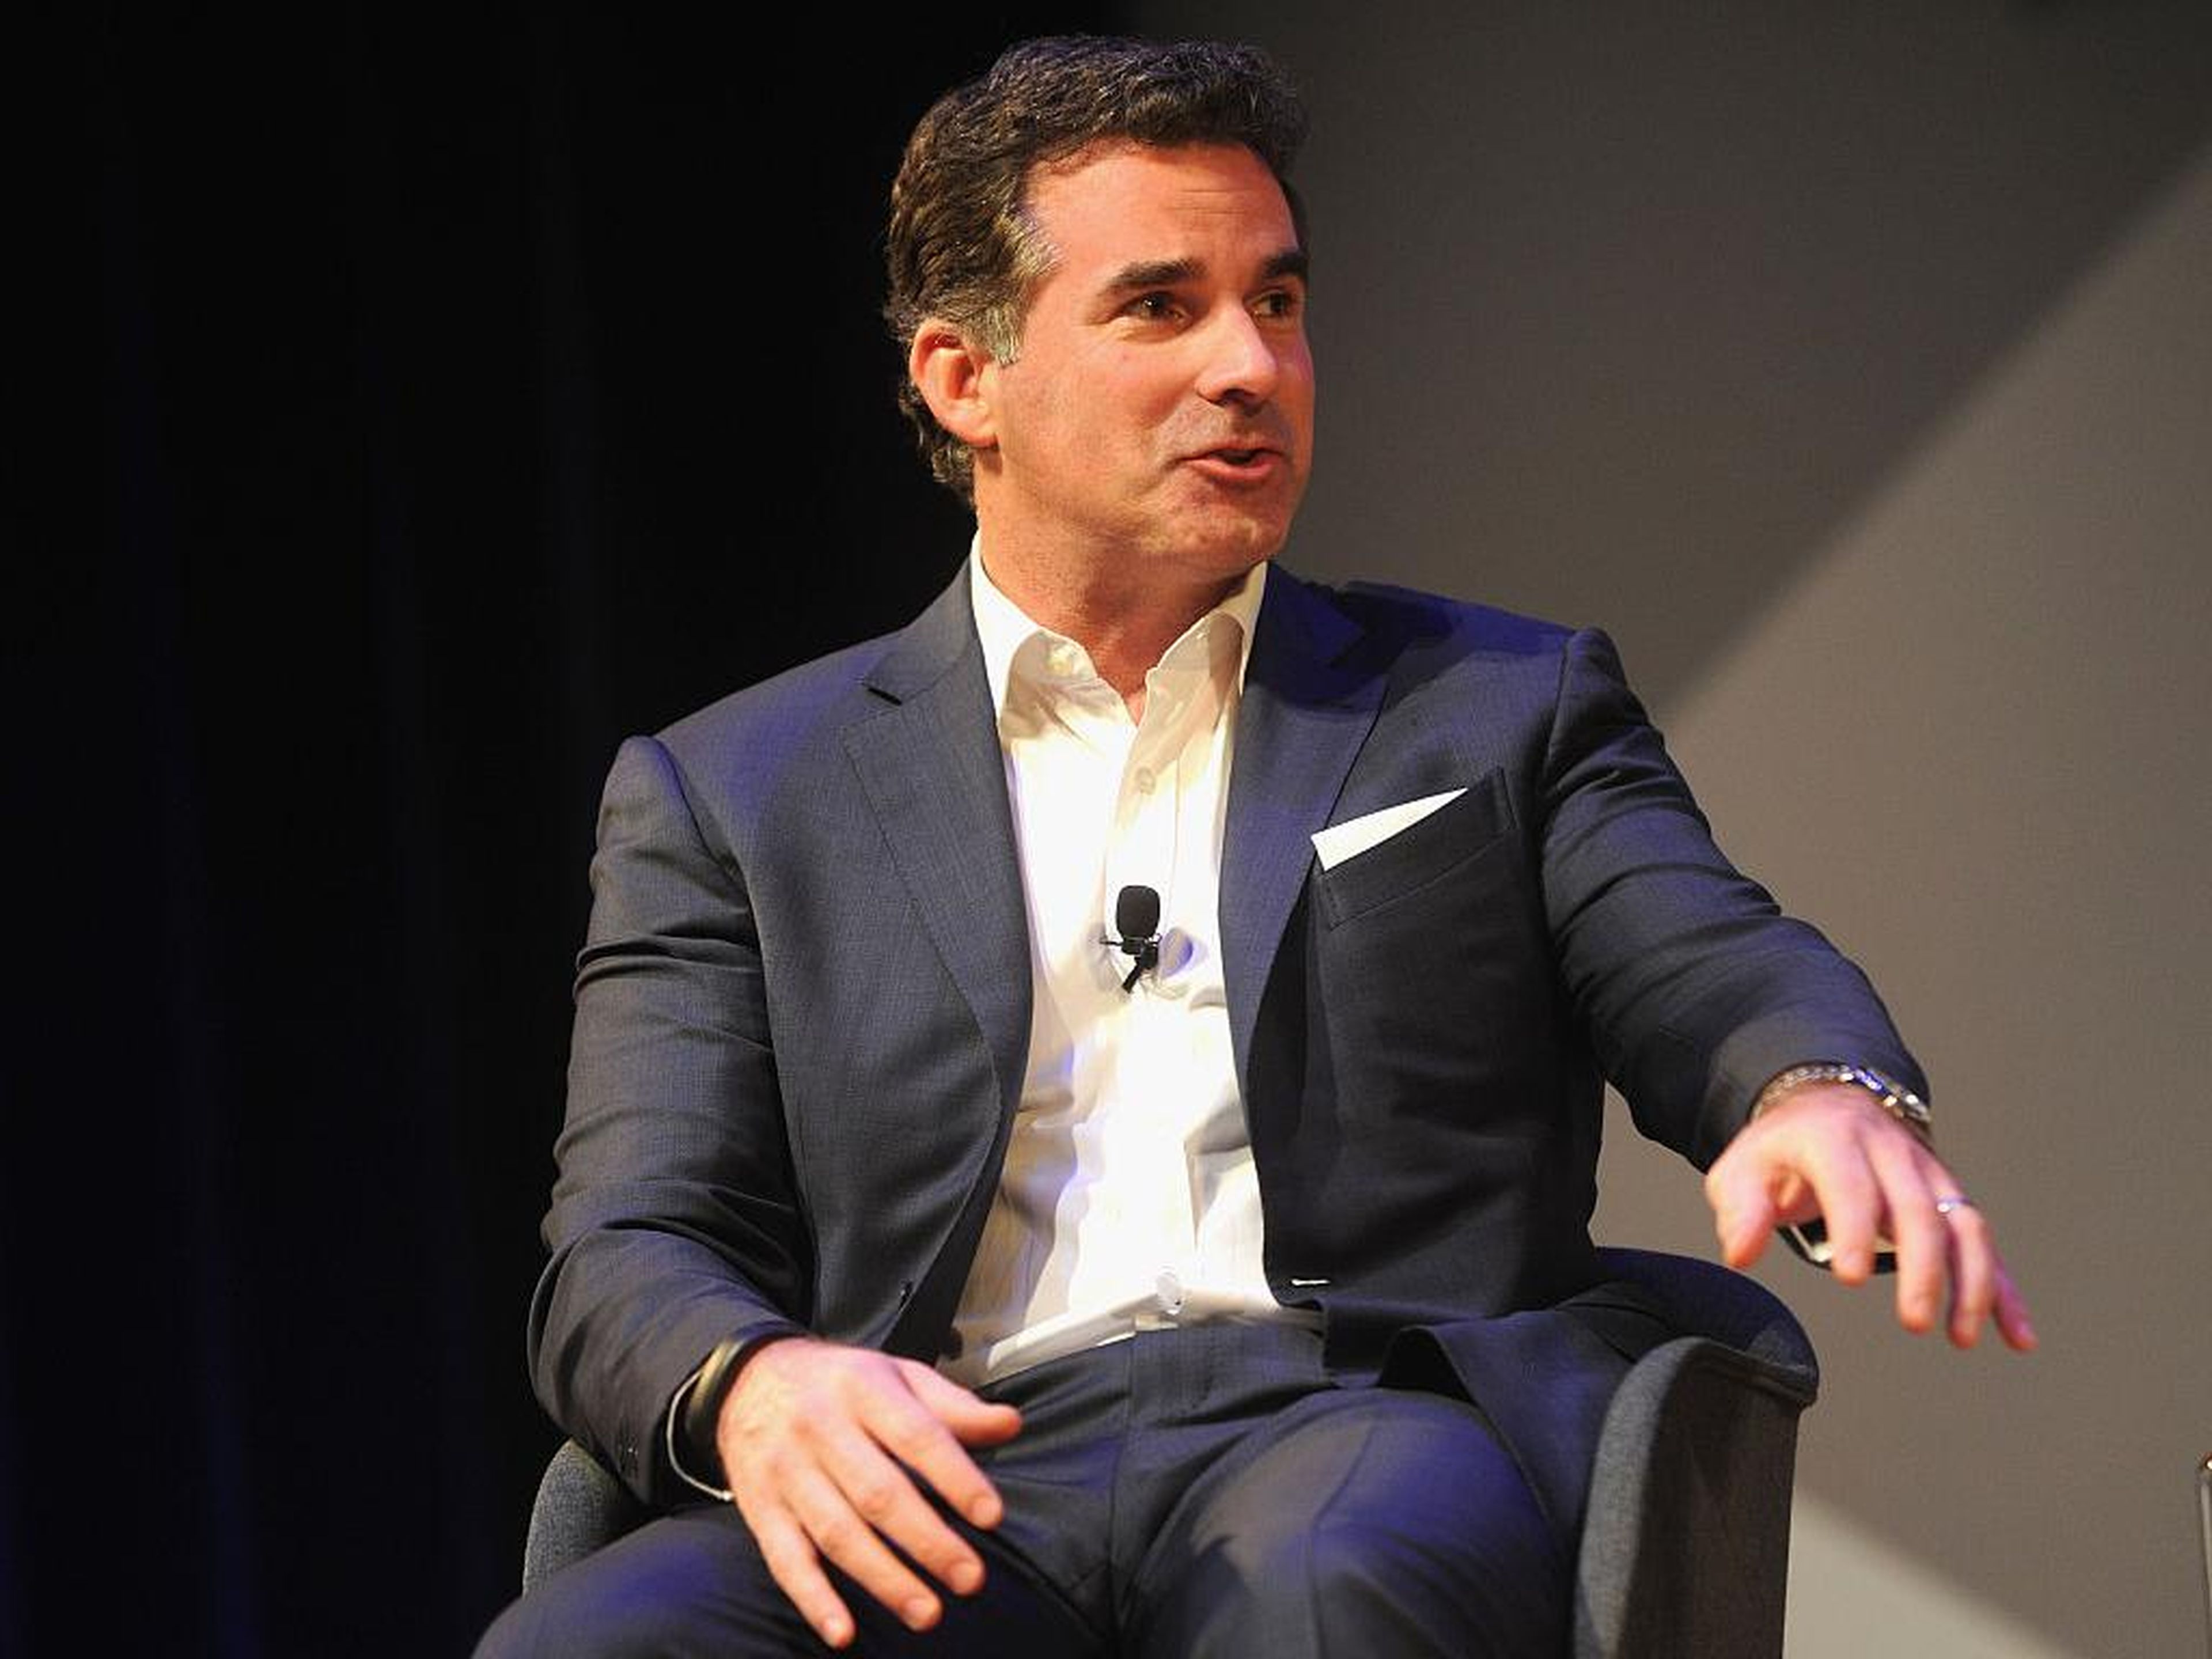 25. Under Armour — Kevin Plank